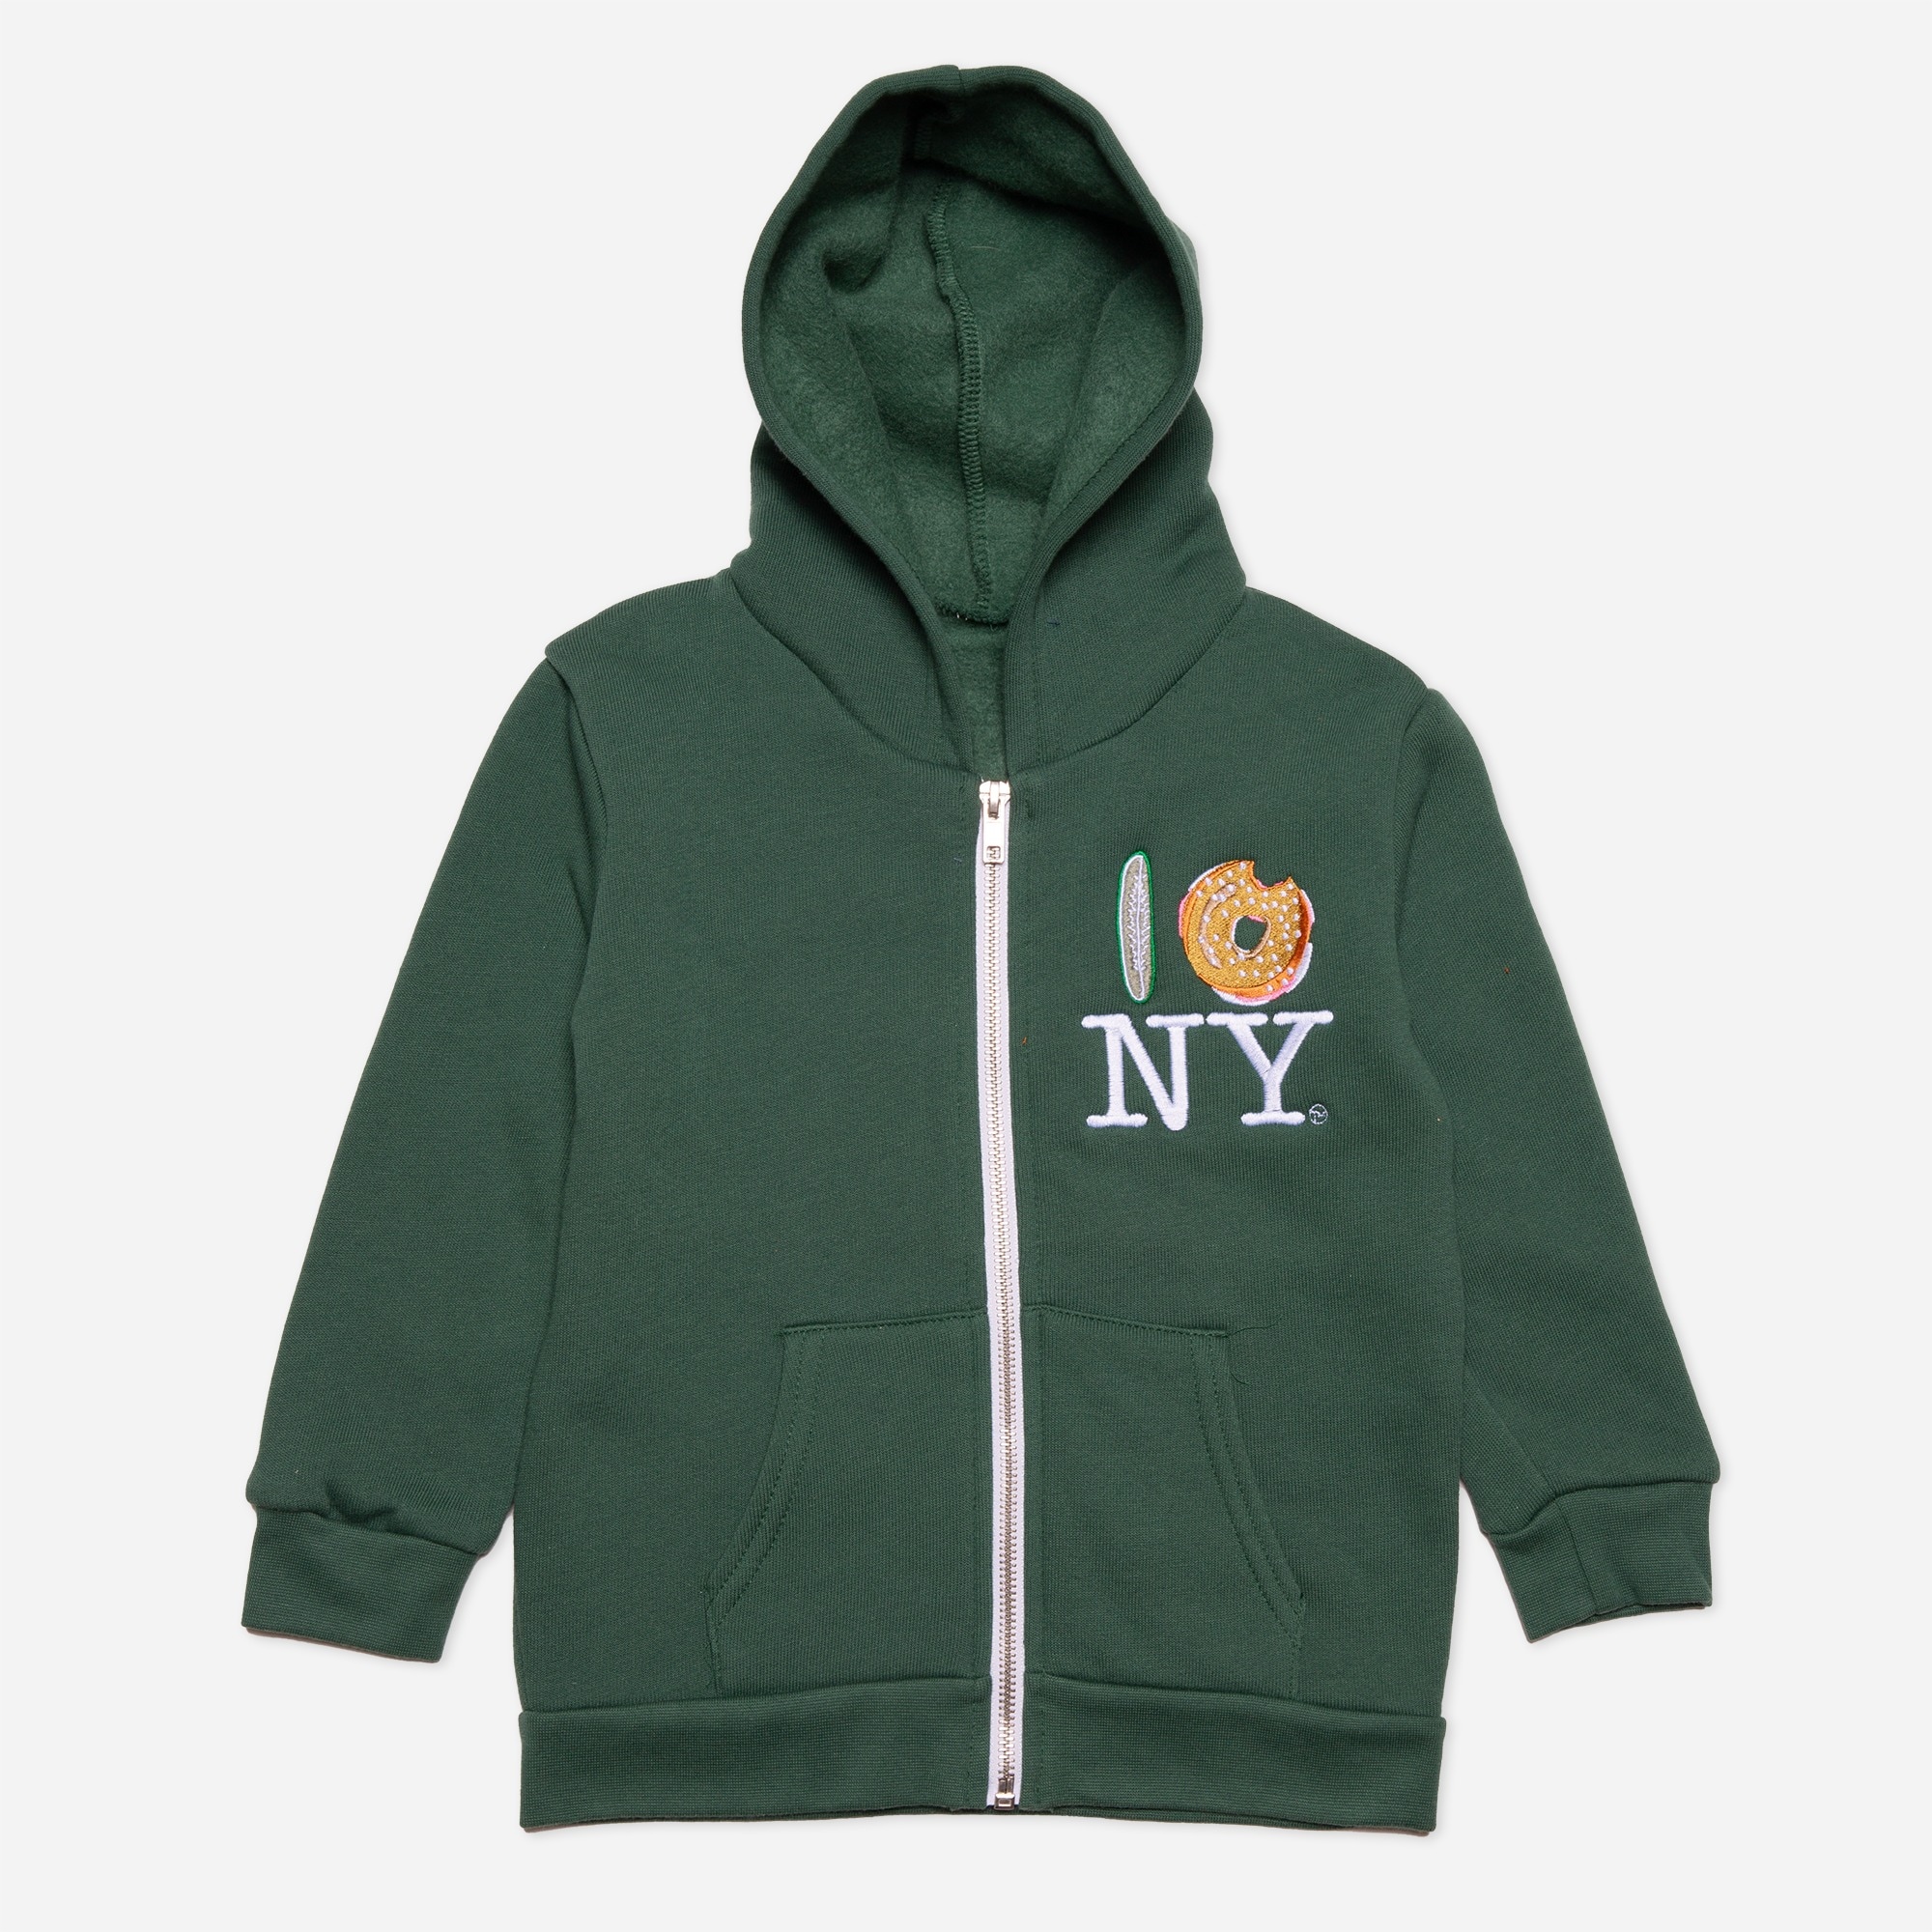  PiccoliNY pickle bagel NY hoodie